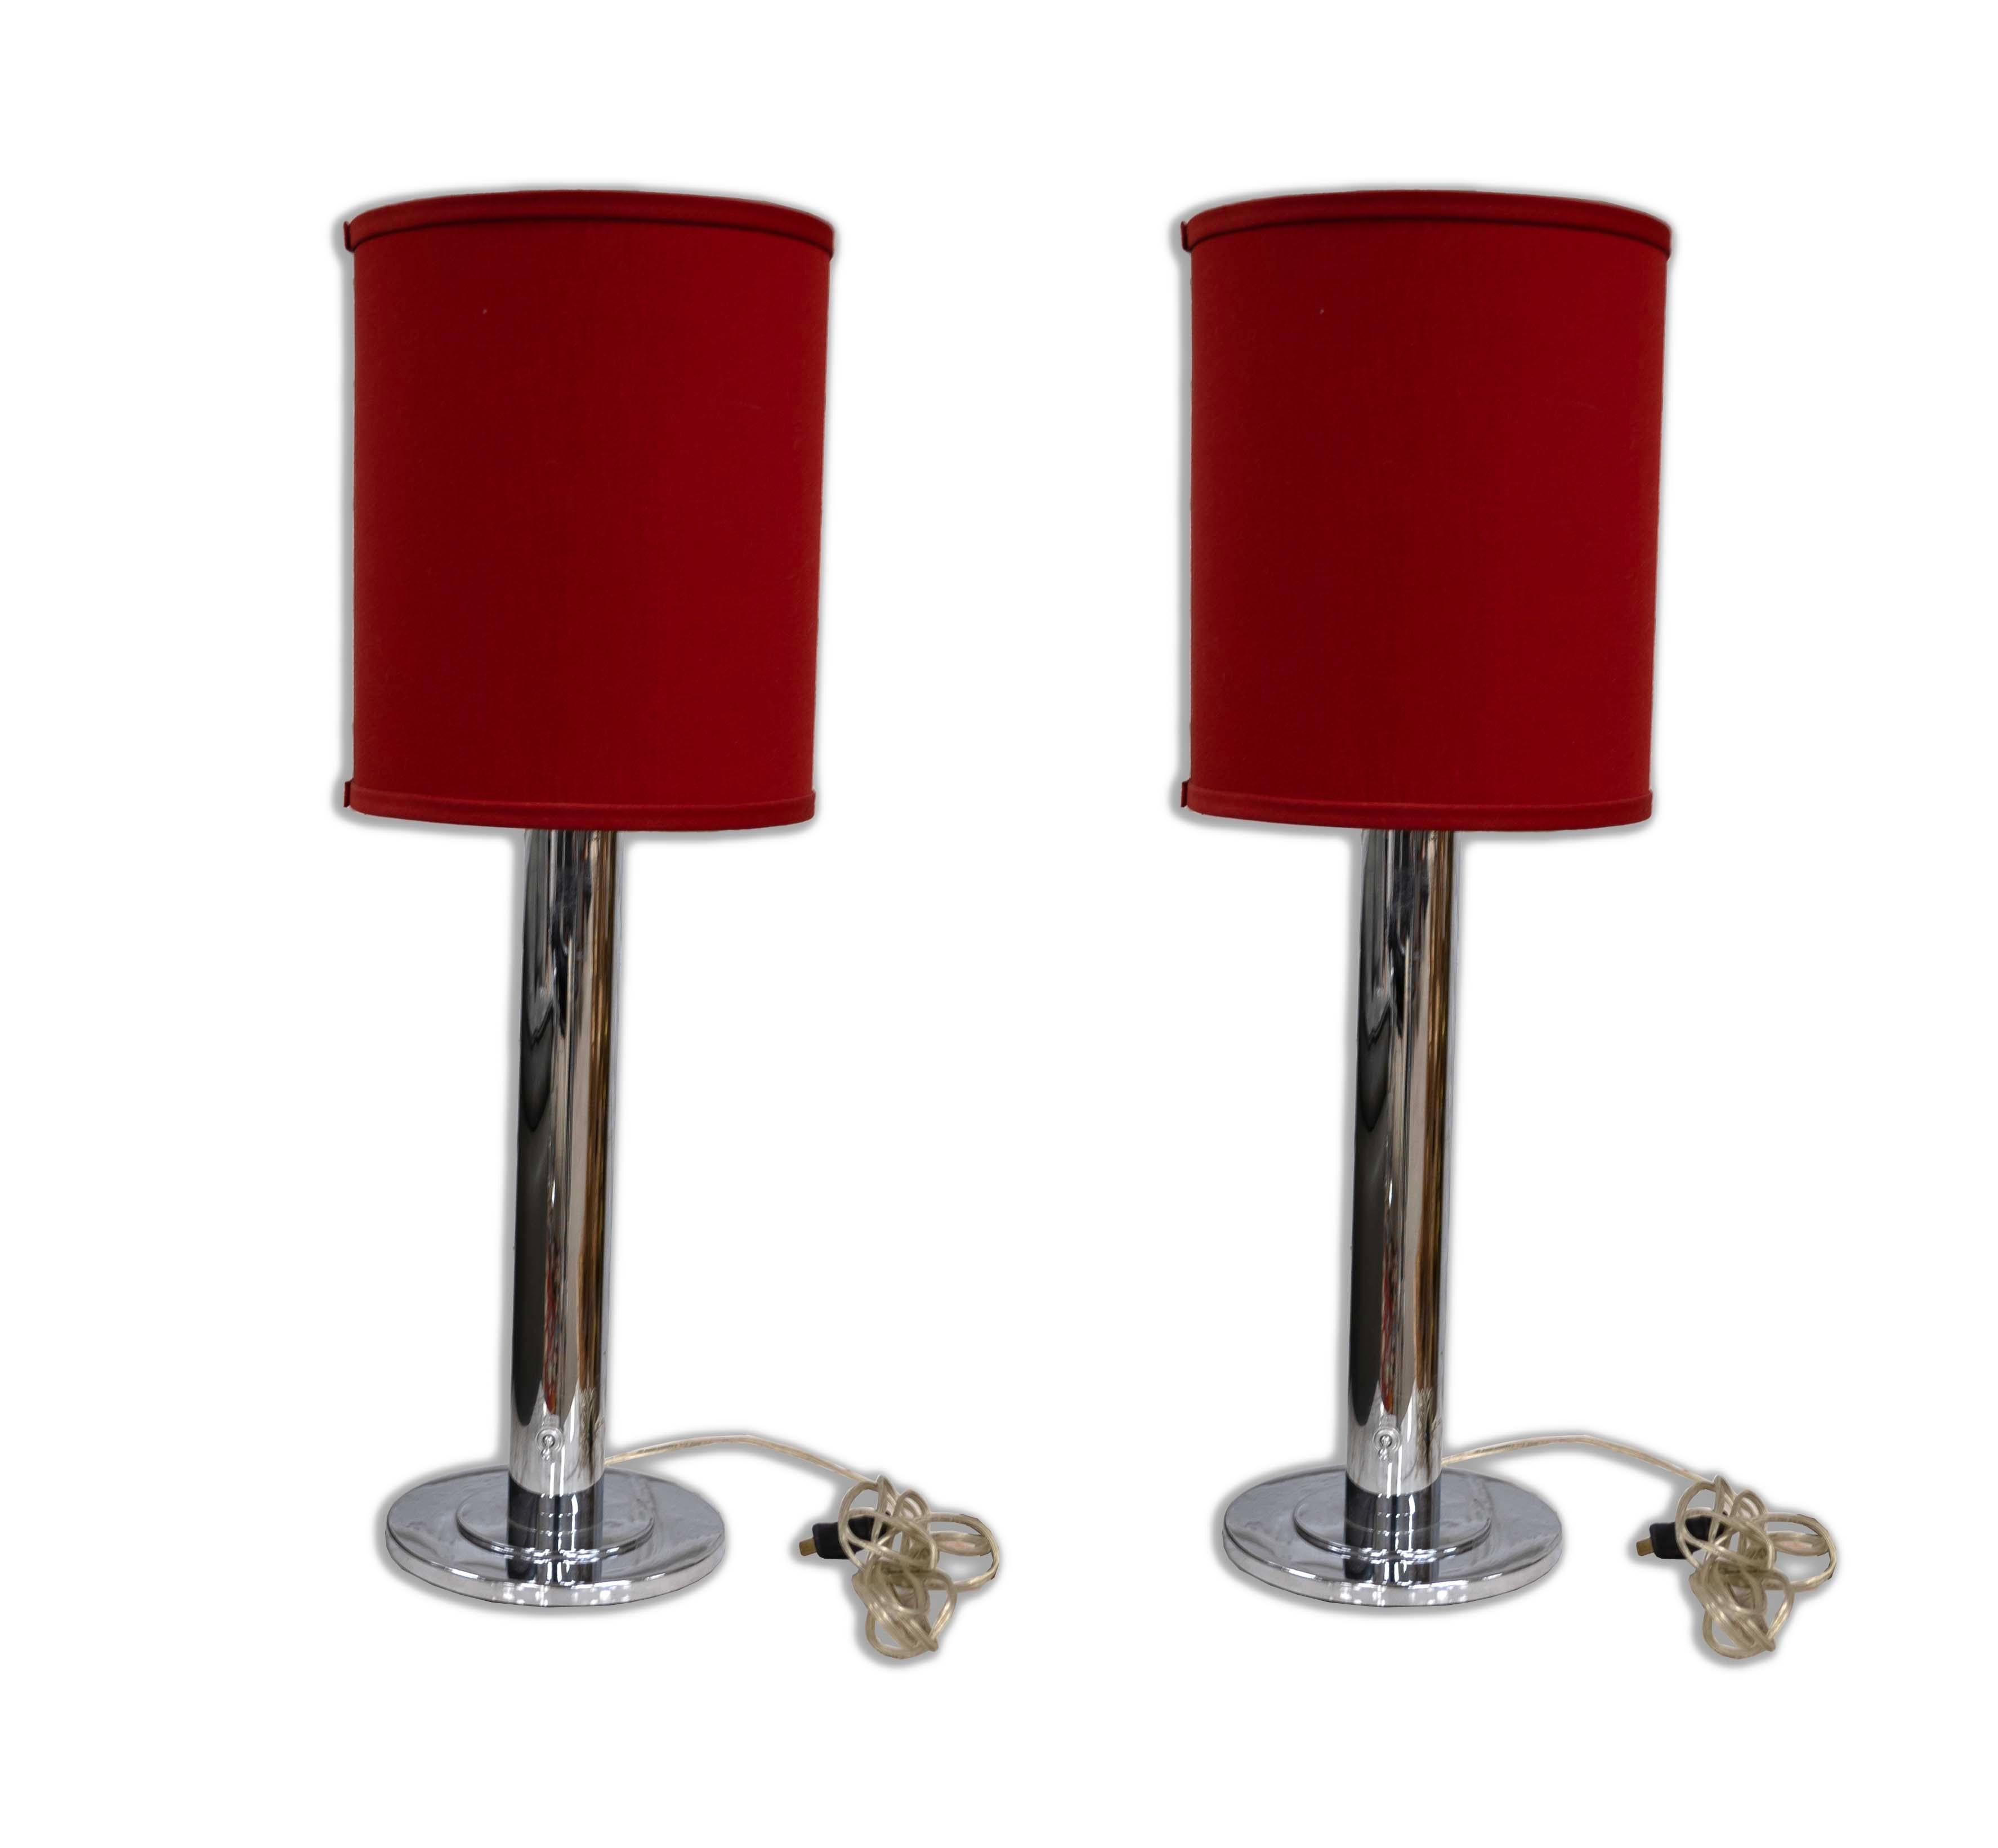 Chic and vibrant, this pair of Nessen Lighting Chrome Table Lamps with Red Shades will invigorate any modern interior. Boasting sleek chrome stems that rise to meet sumptuous red shades, these lamps are a striking combination of contemporary design